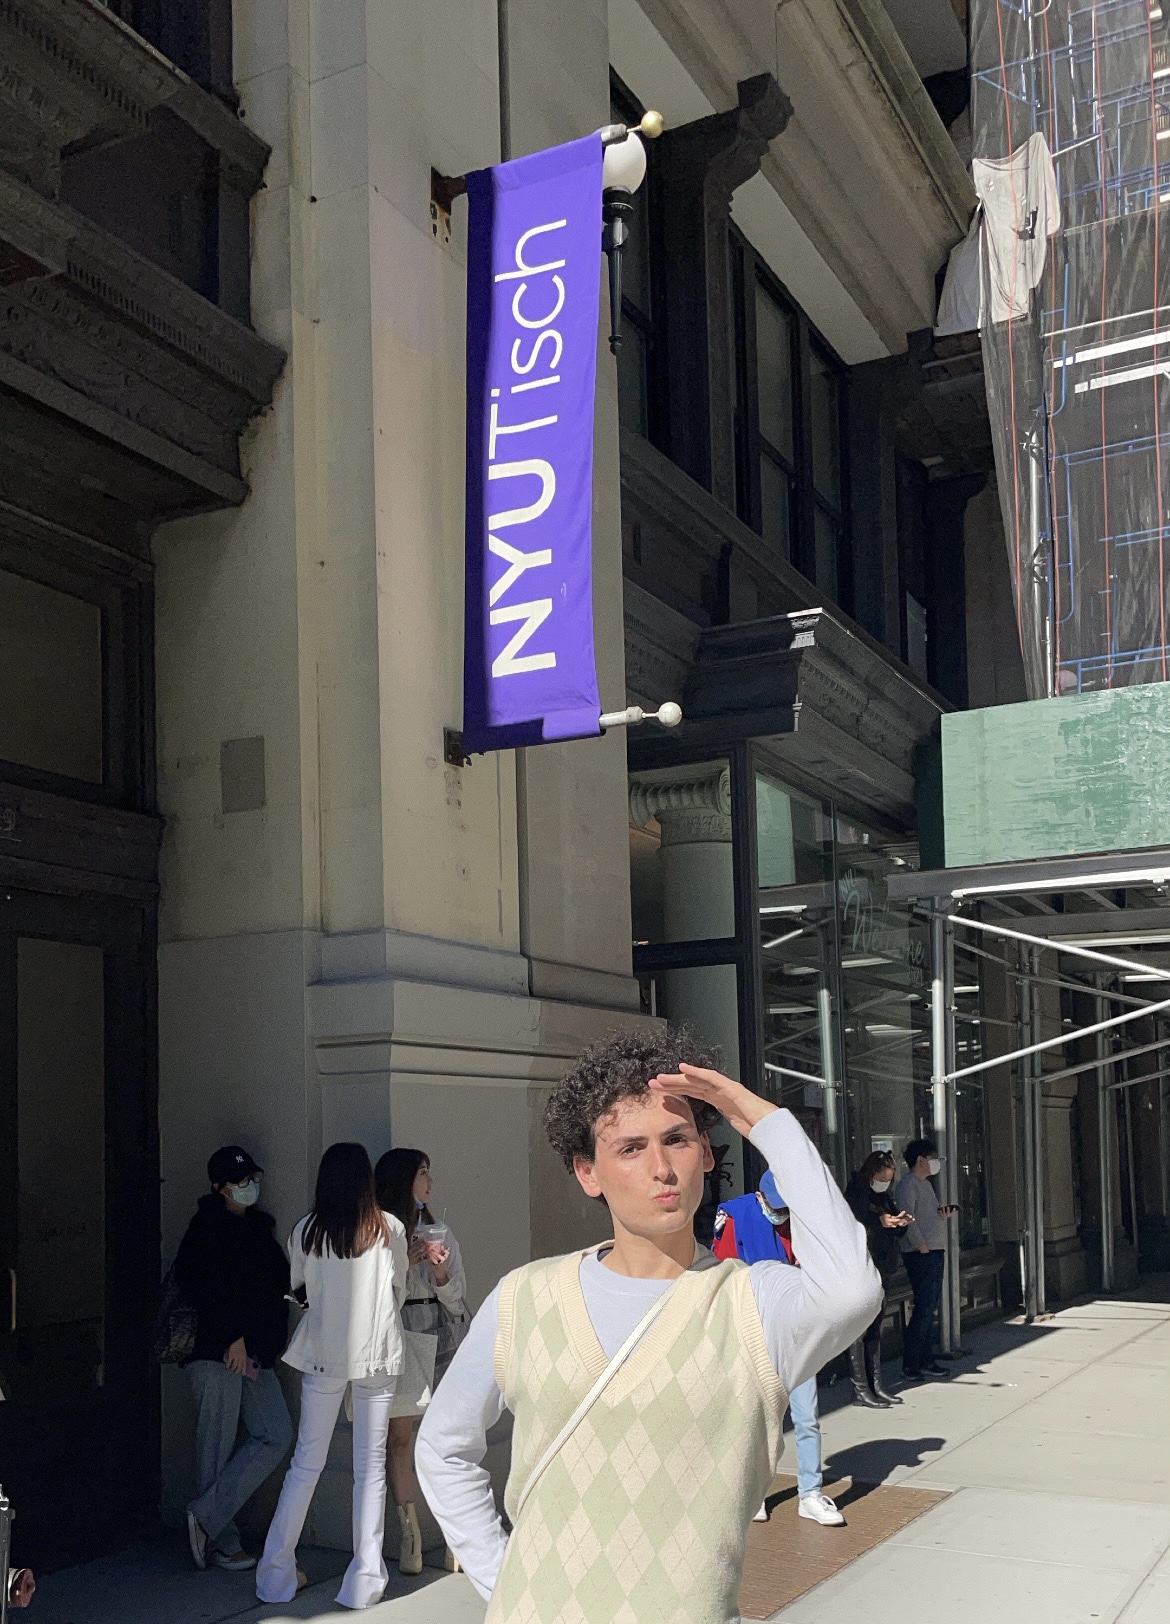 The author in front of the NYU Tisch School of the Arts building. His left hand blocks the sun from his eyes as he searches for a good place to study at NYU.